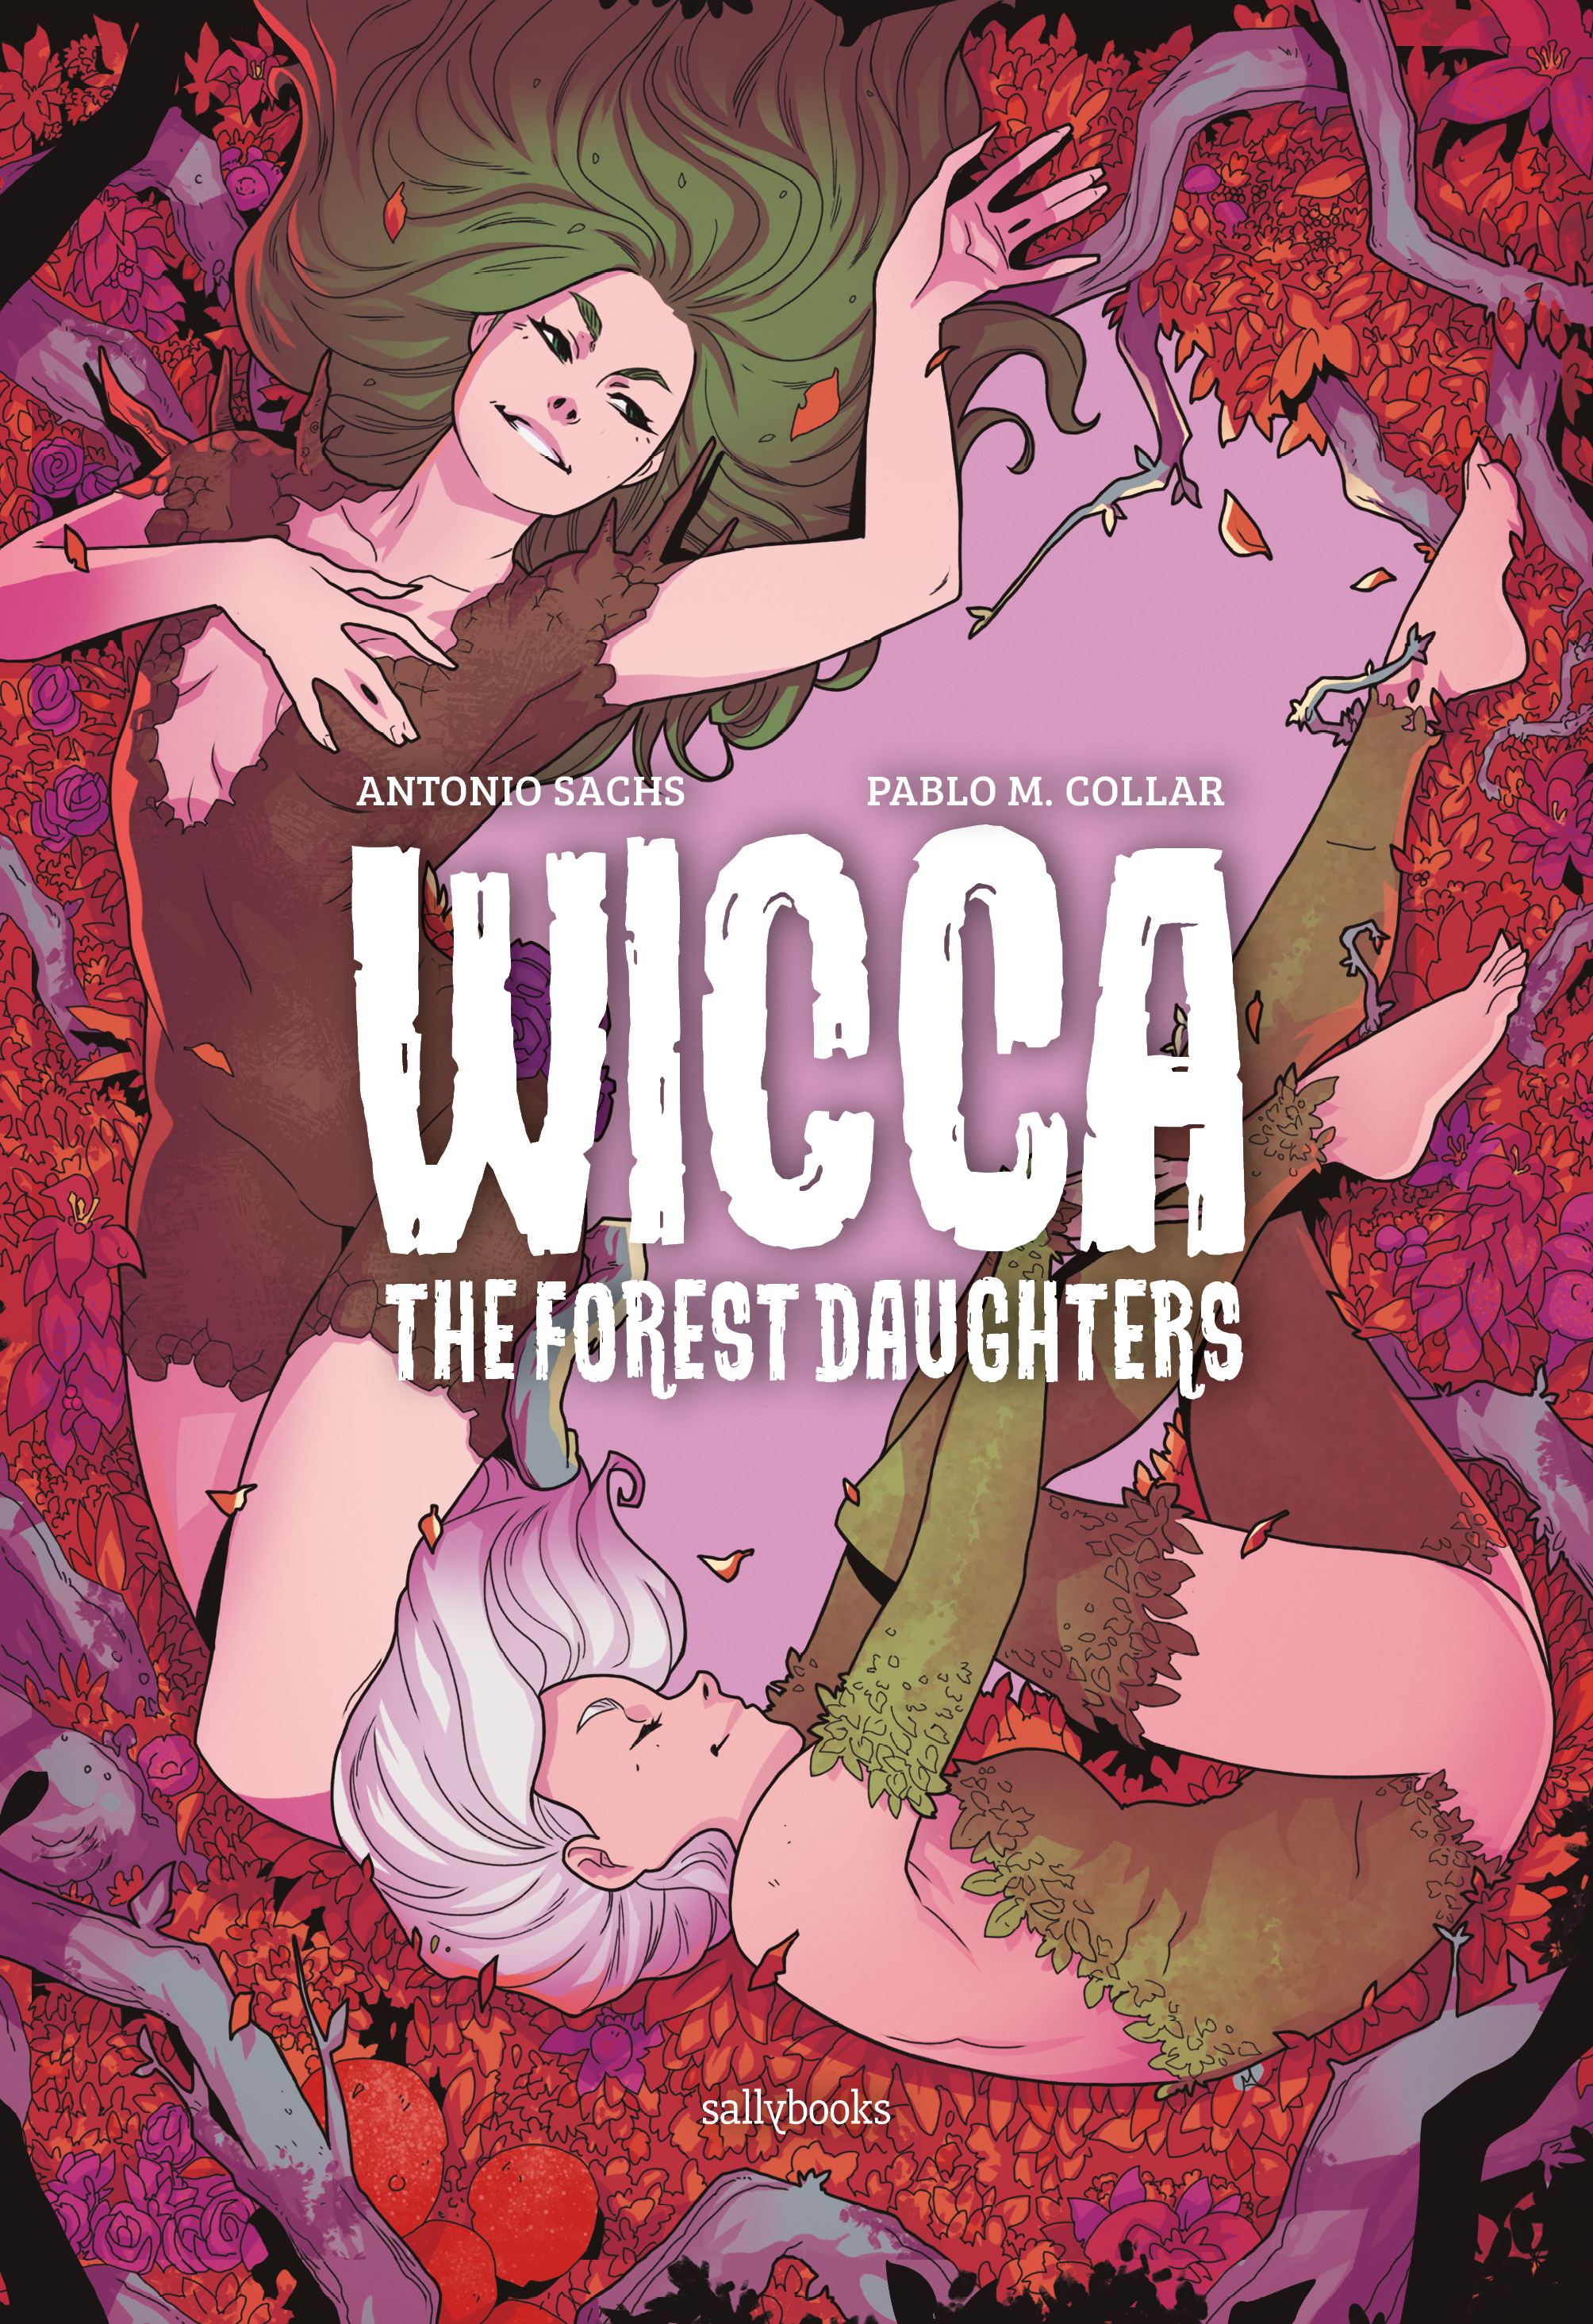 WICCA. THE FOREST DAUGHTERS